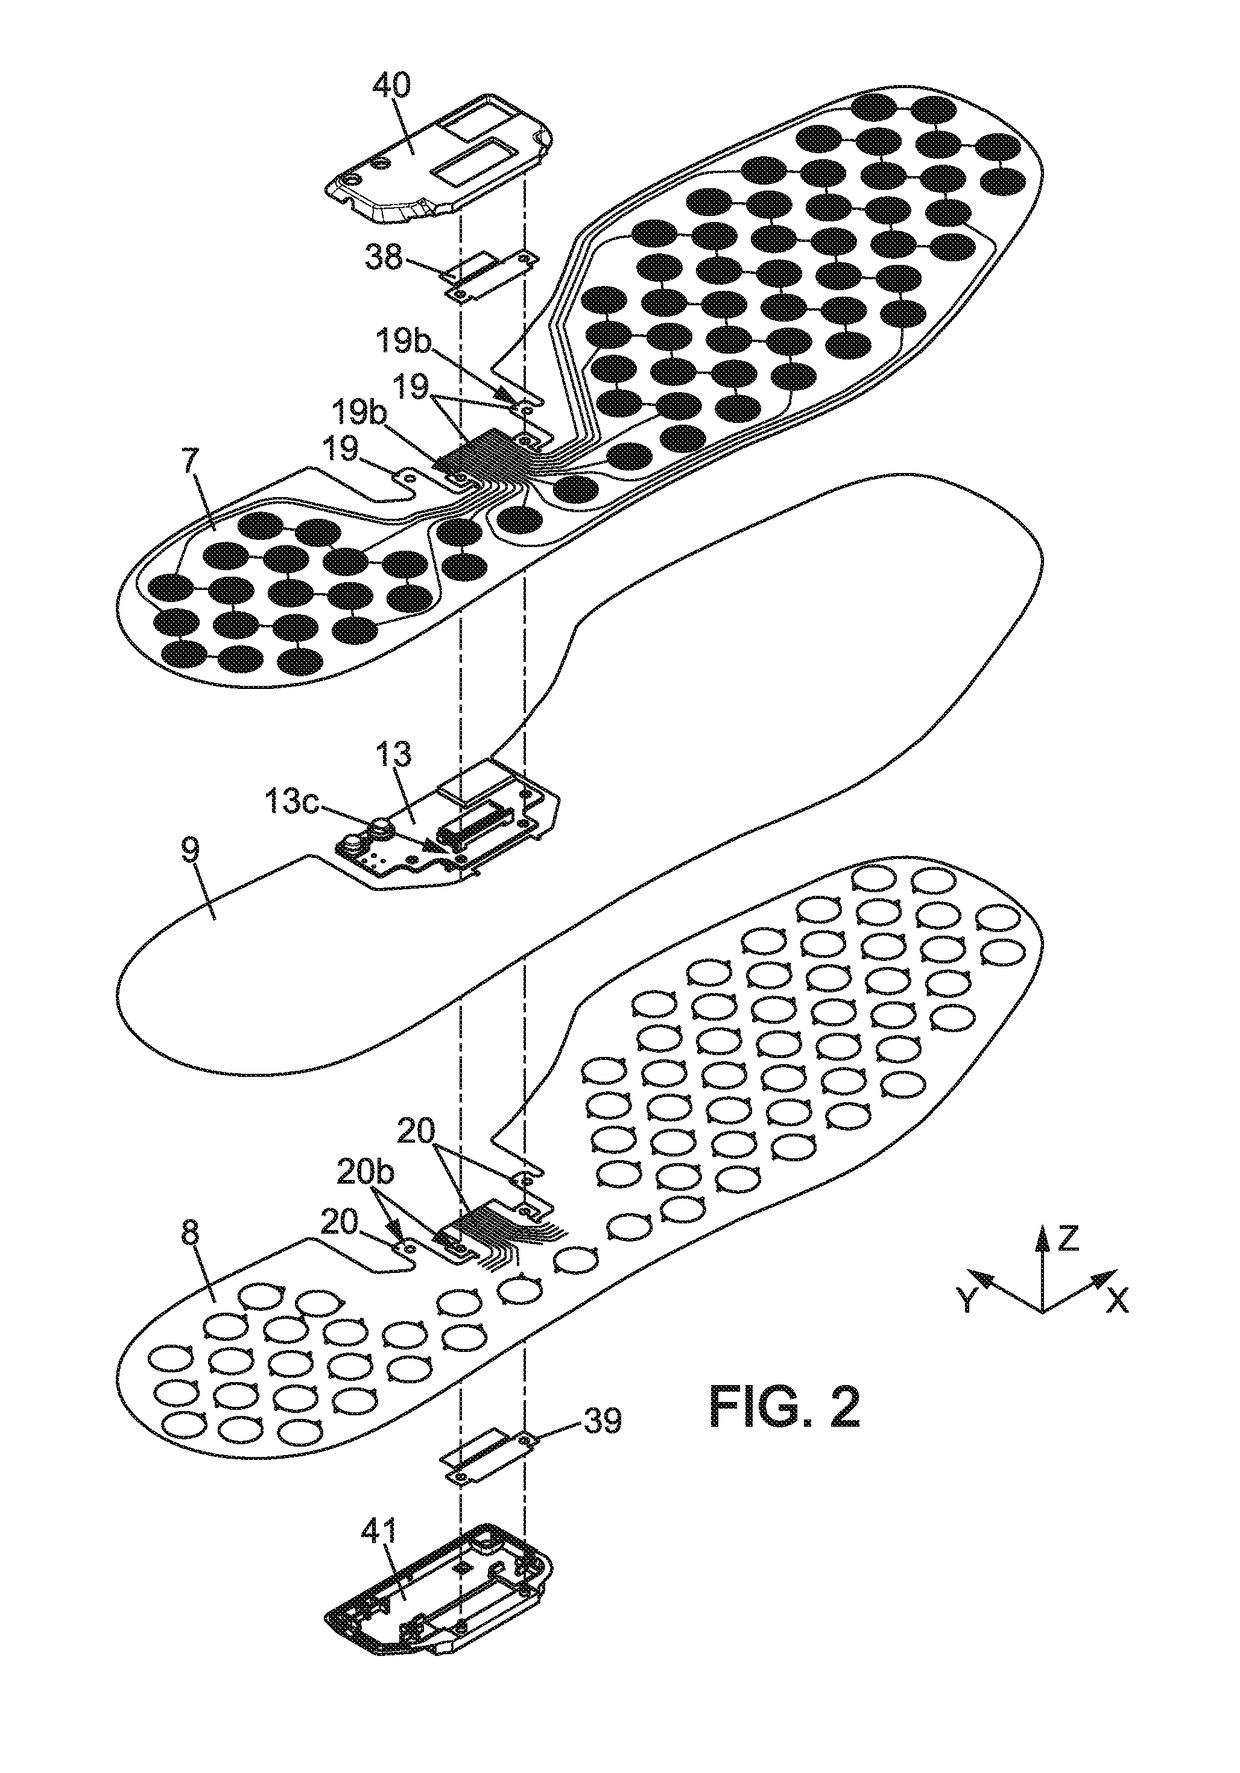 Insoles for Insertion into an Article of Footwear and System for Monitoring a Foot Pressure